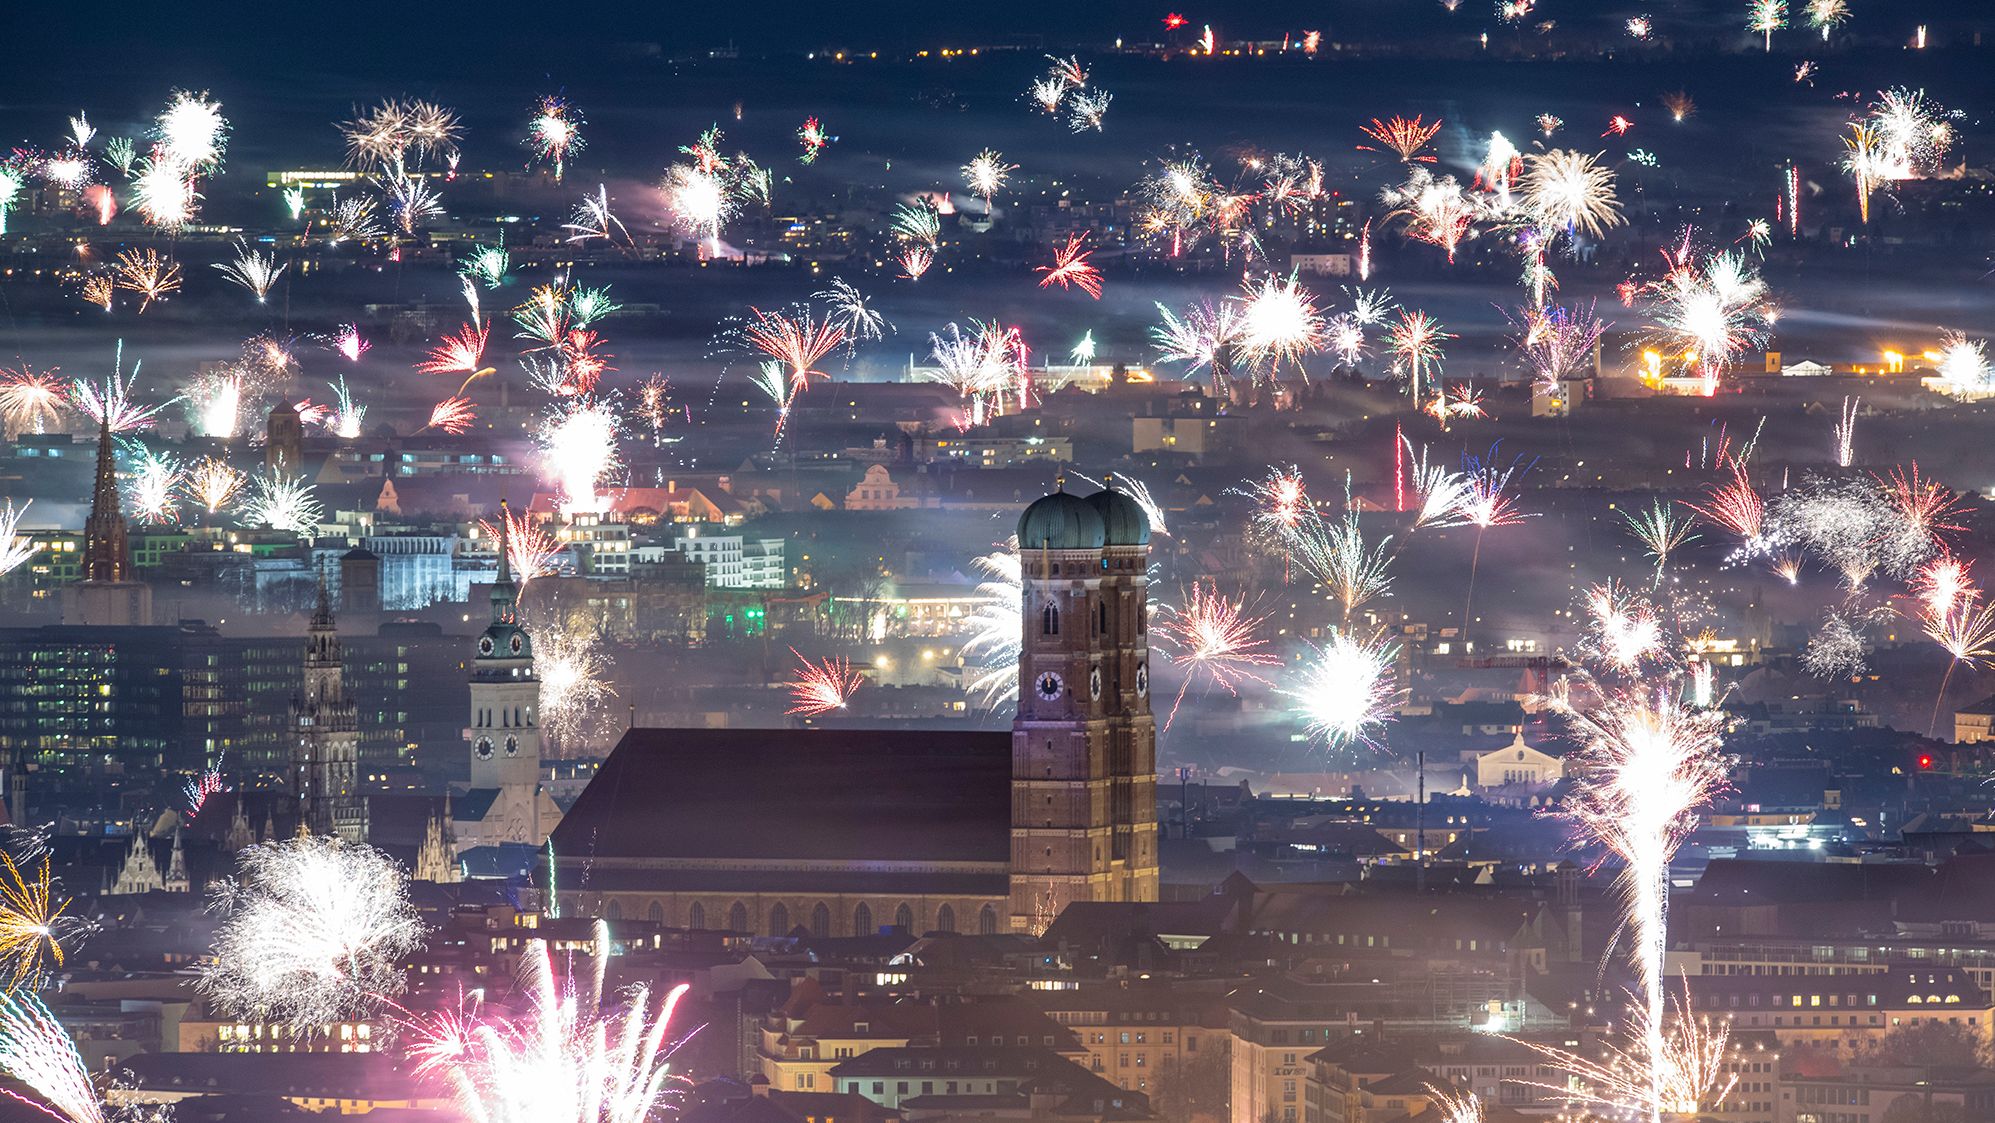 Fireworks are seen over Munich, Germany.